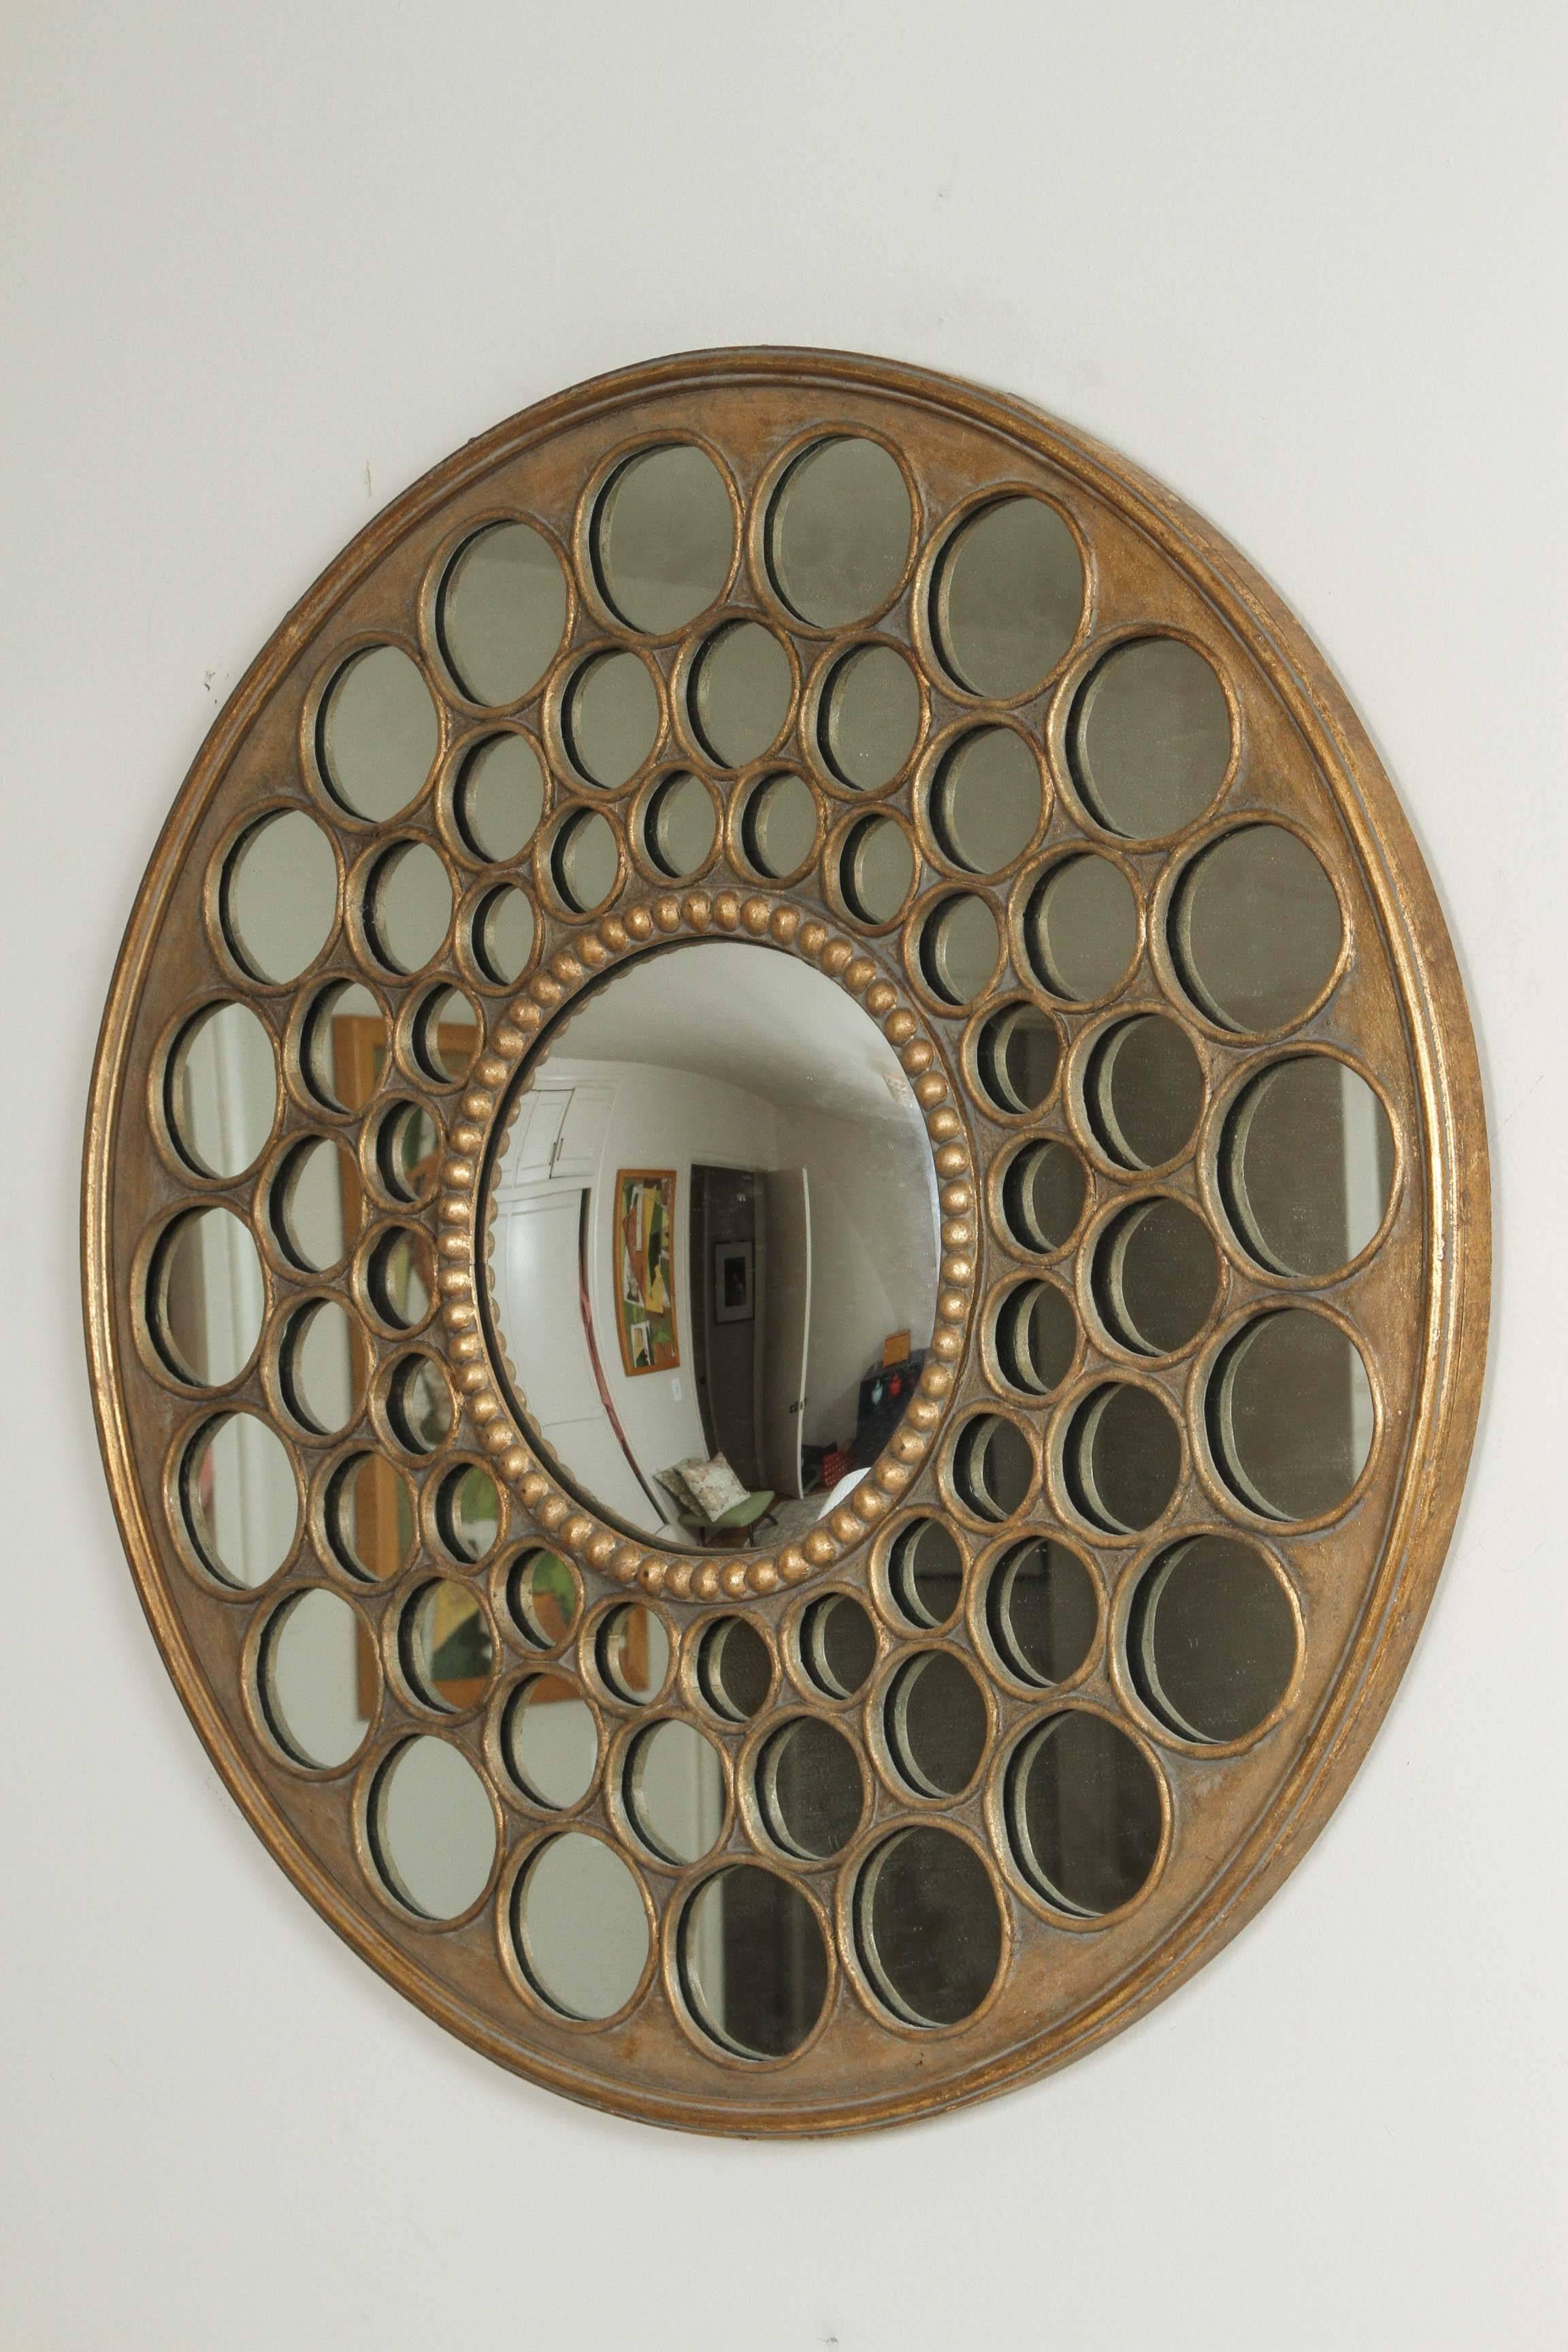 With a convex center and surrounding circles blossoming from it, this mirror is a great statement piece to complete any blank wall. The gold leaf finish makes the mirror an elegant and timeless piece.